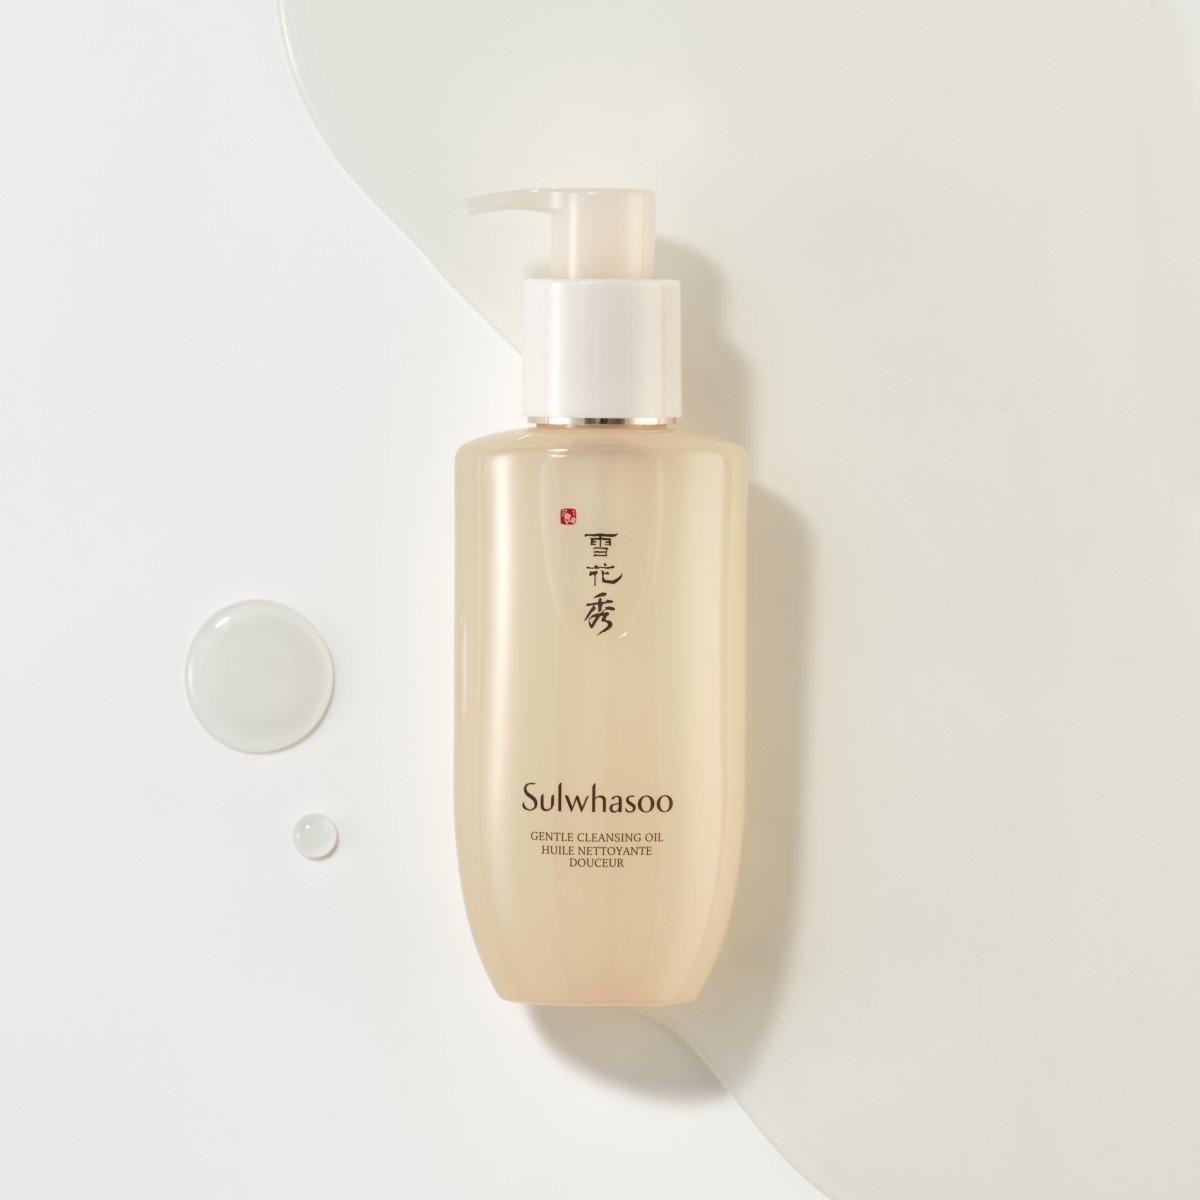 Sulwhasoo - Gentle Cleansing Oil make up remover